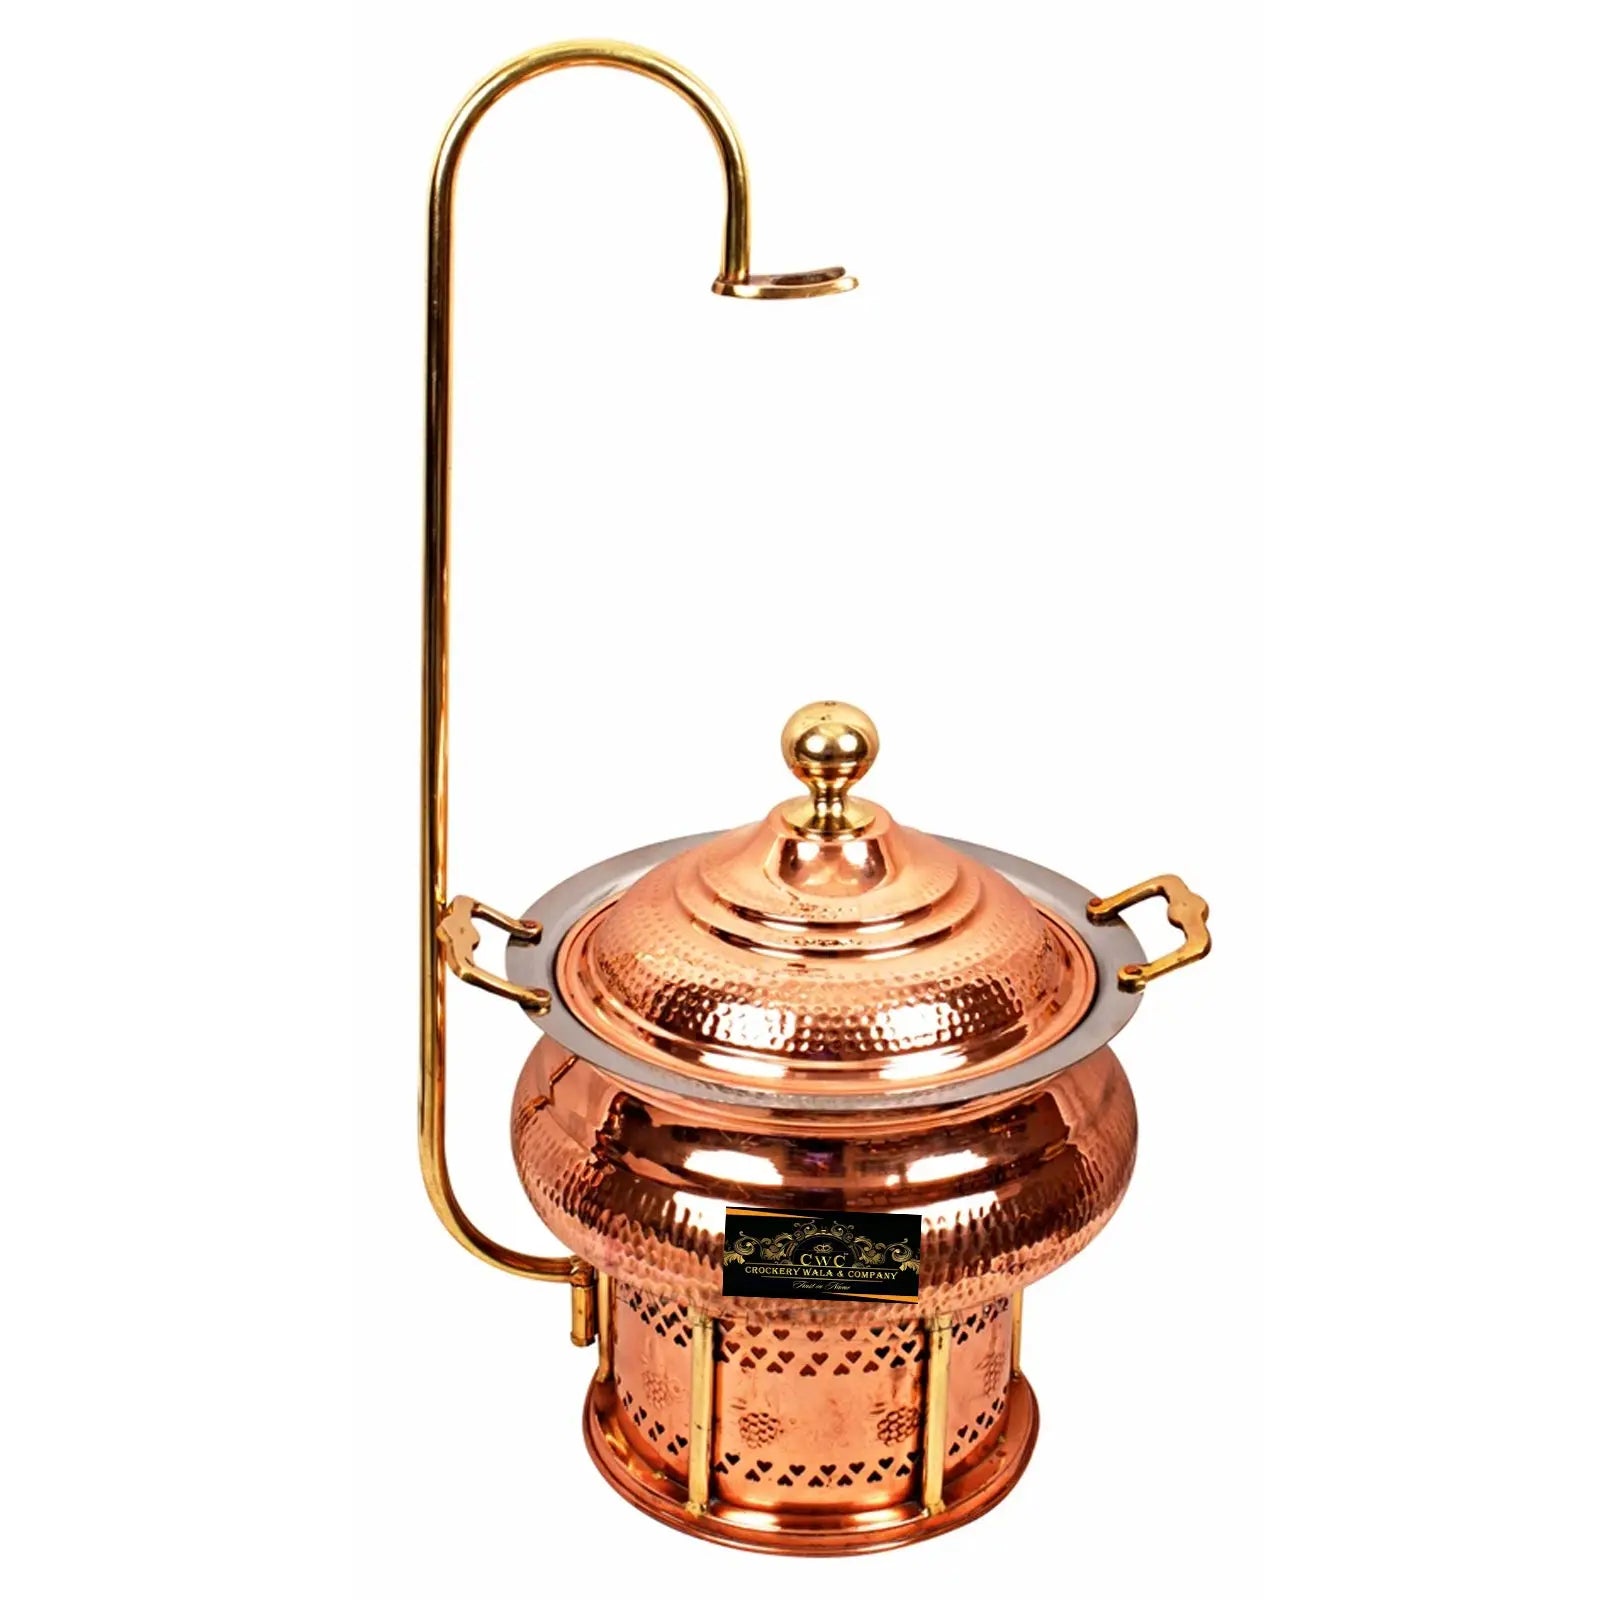 Crockery Wala And Company Copper Steel Chaffing Dish With Stand Hammered Design 6 Liters - CROCKERY WALA AND COMPANY 